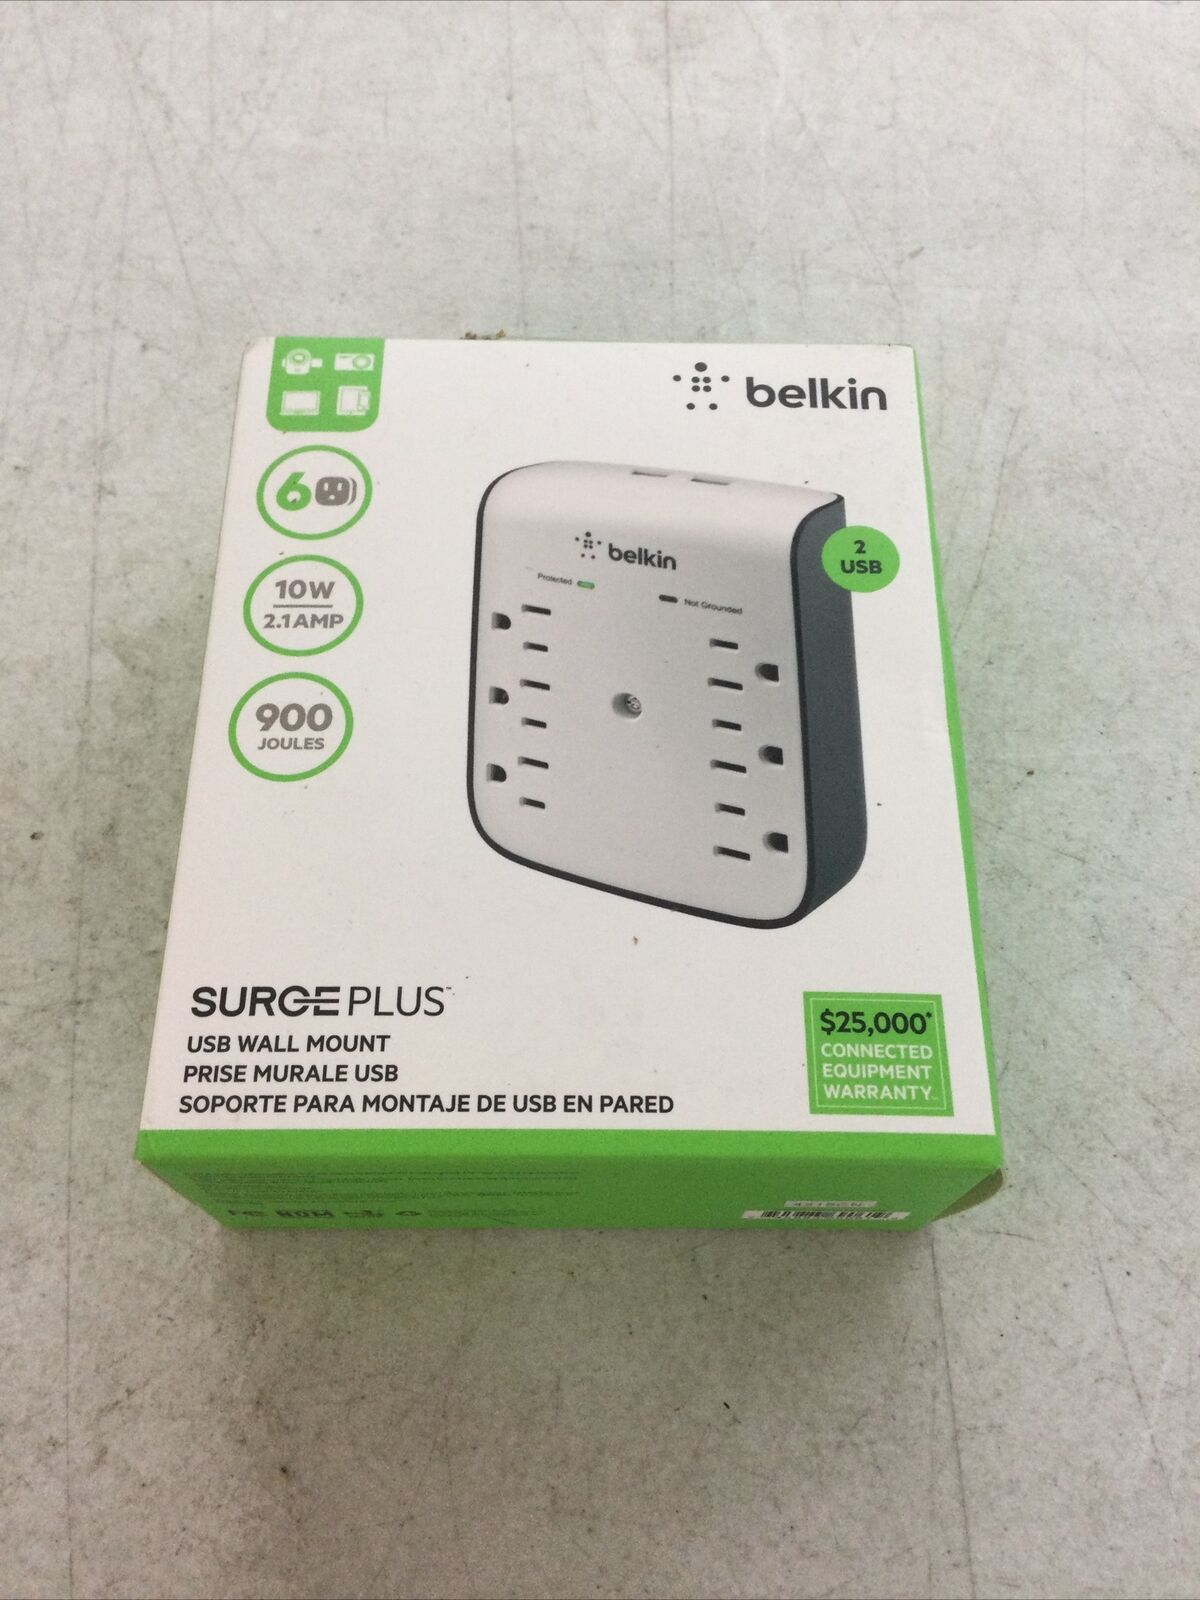 Belkin SurgePlus 10W 6-Outlet USB Surge Protector Brand New